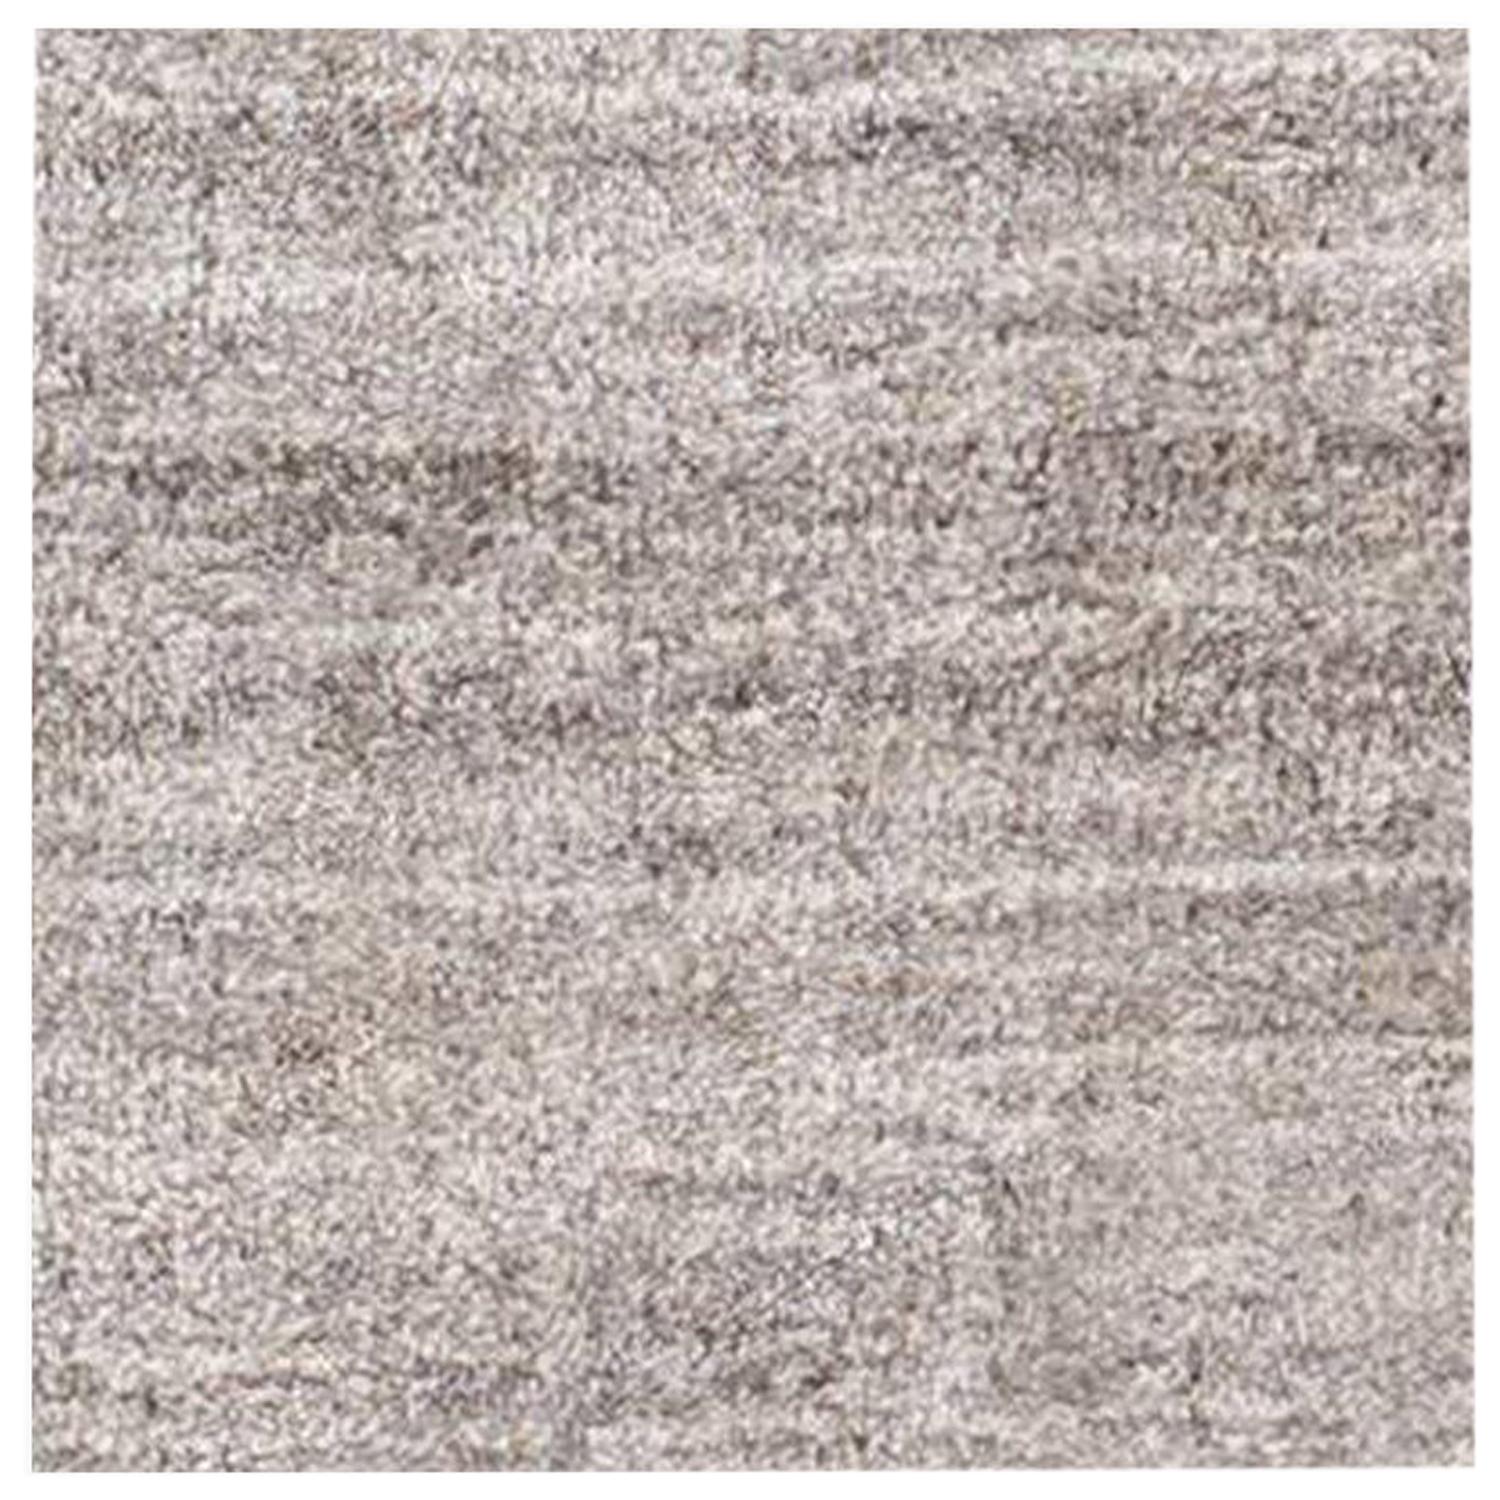 Swatch for Nahla Rug in Fog by Ben Soleimani For Sale